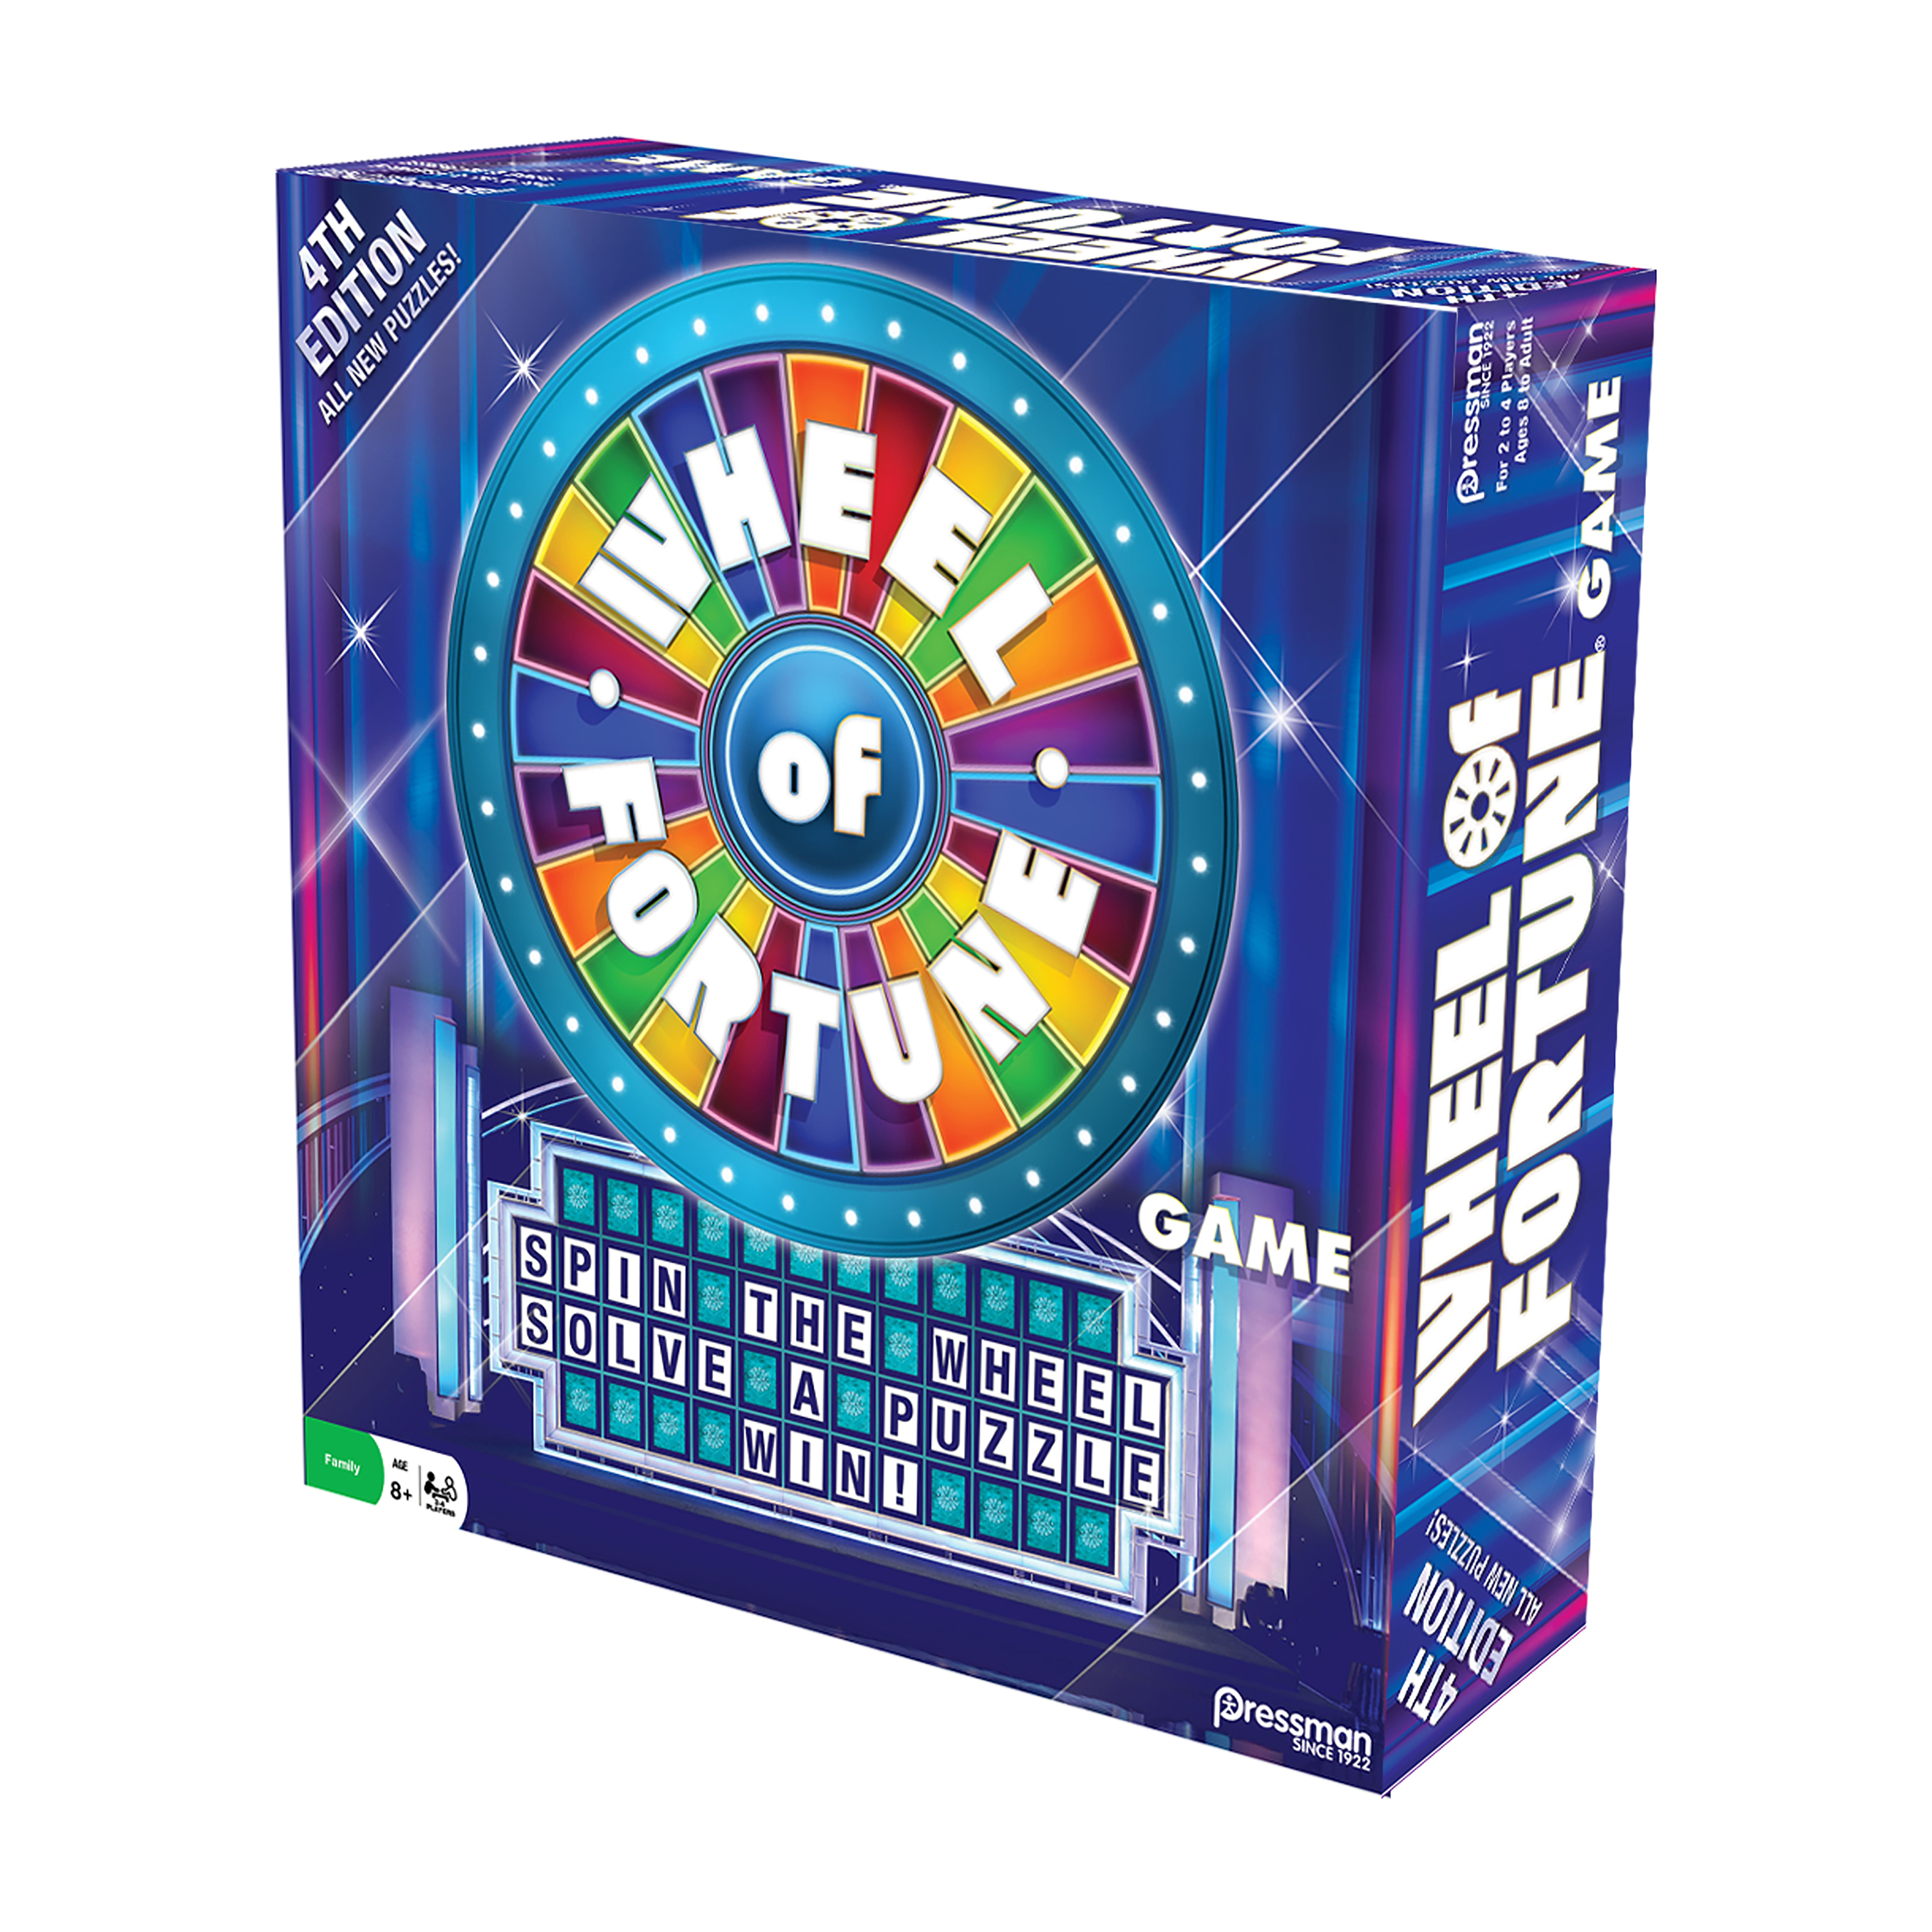 Wheel of fortune game online free